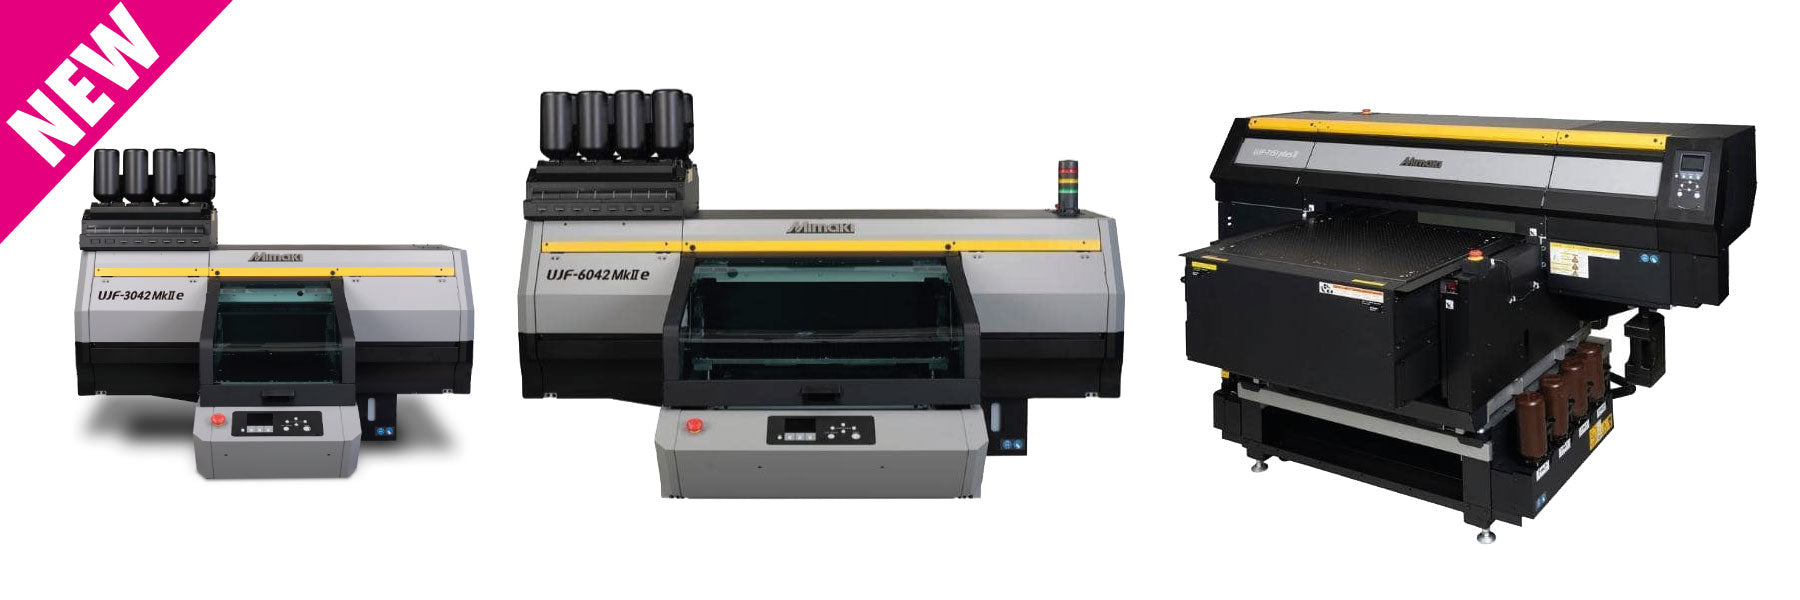 Mimaki release new UV LED Flatbed direct to object printers: UJF-MkII e Series and the UJF-7151plus II.